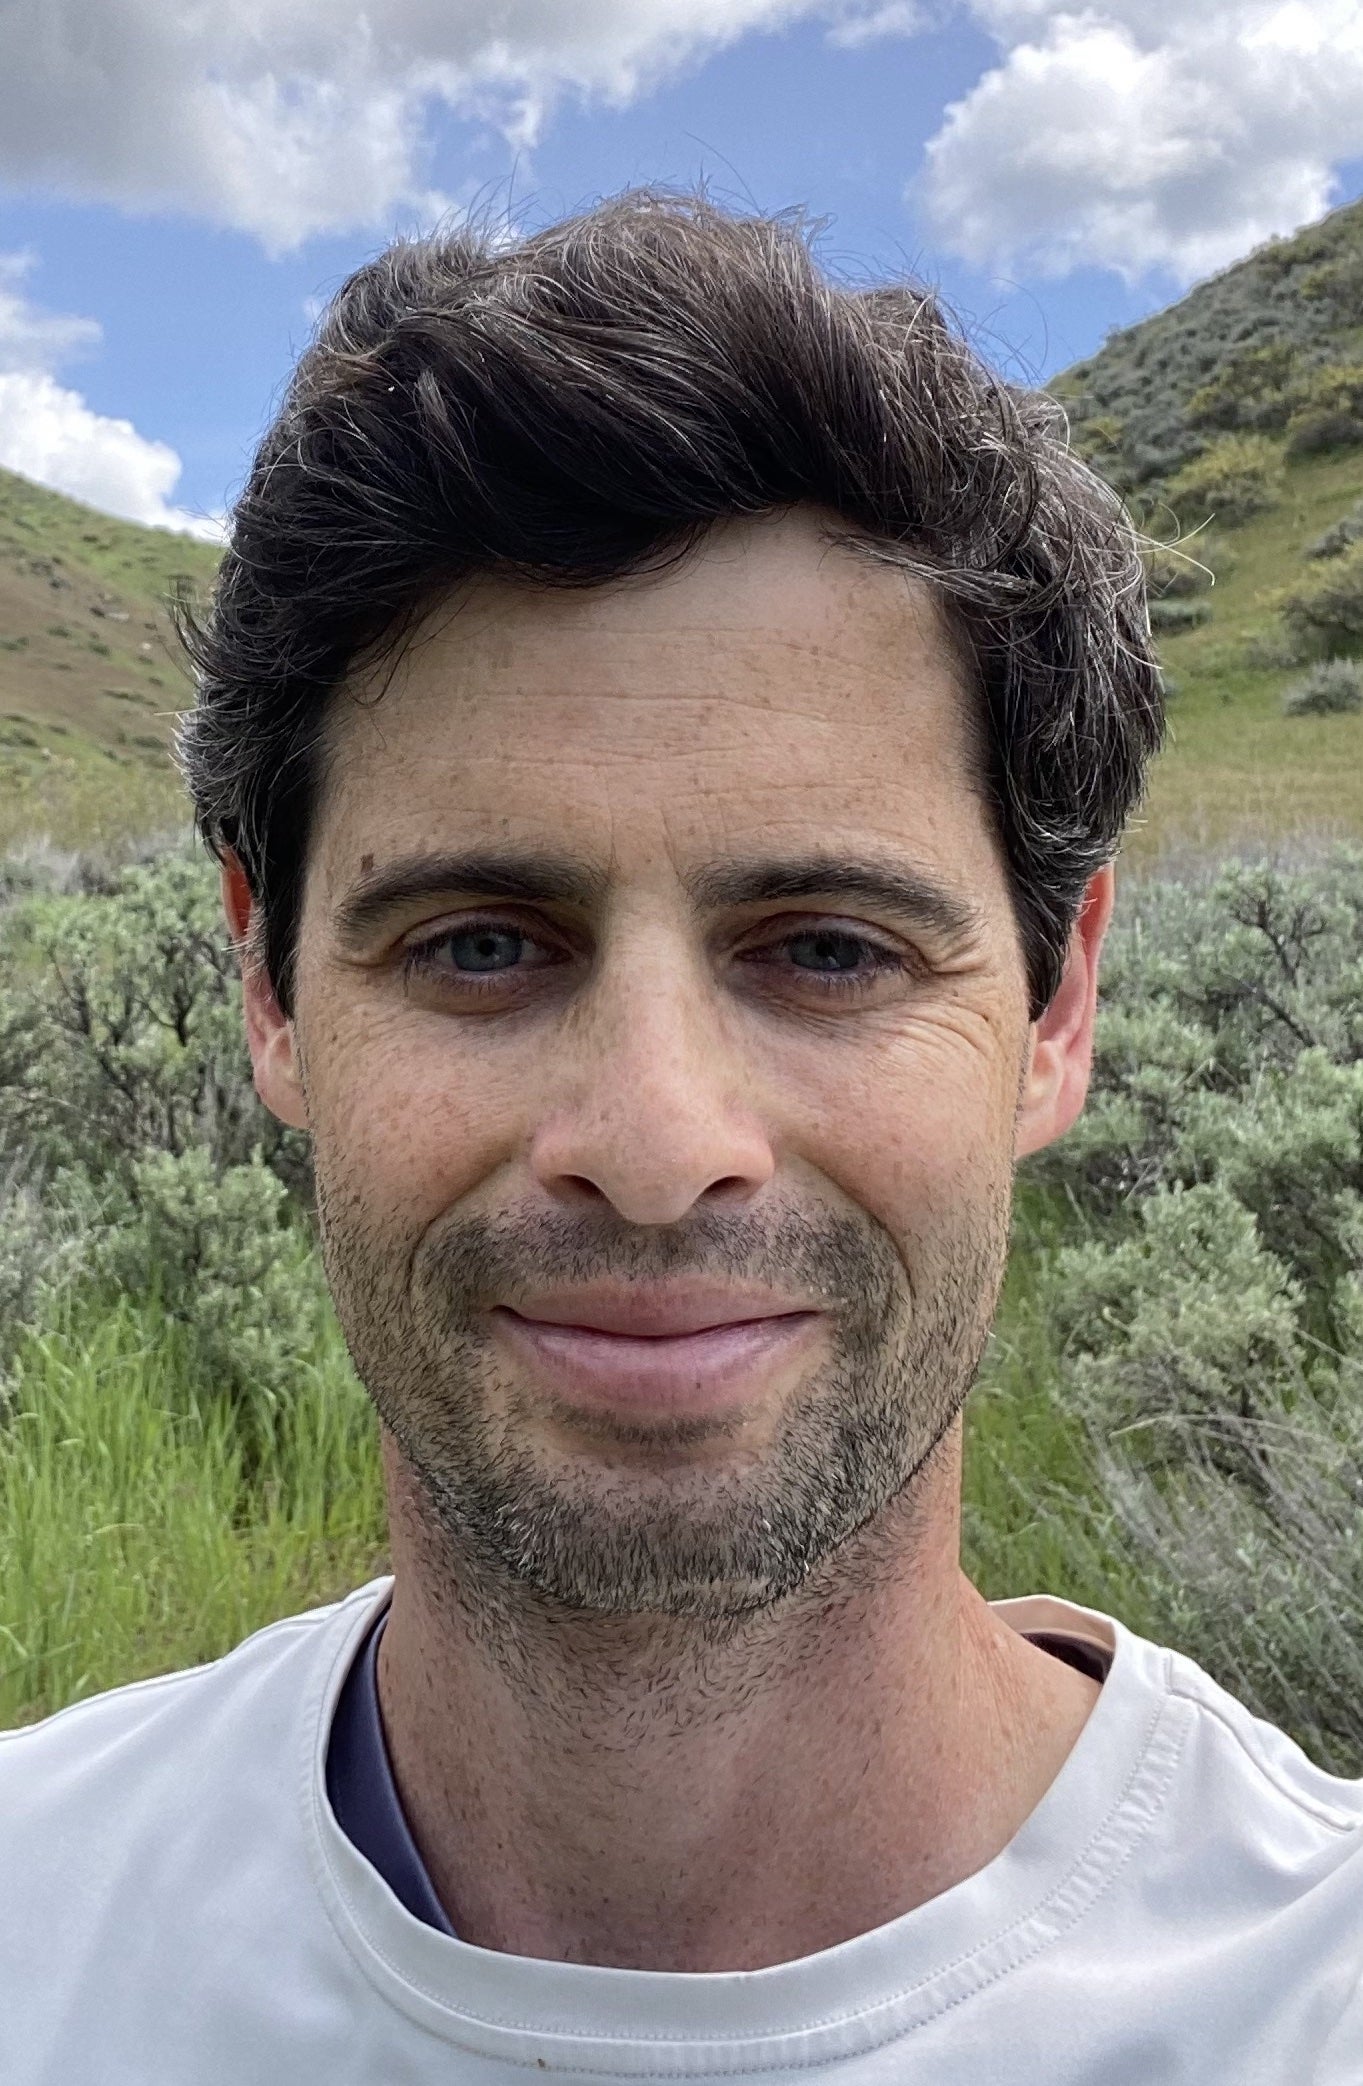 A man with light skin and stubble is standing in front of a green landscape. He has short brown hair and is smiling.